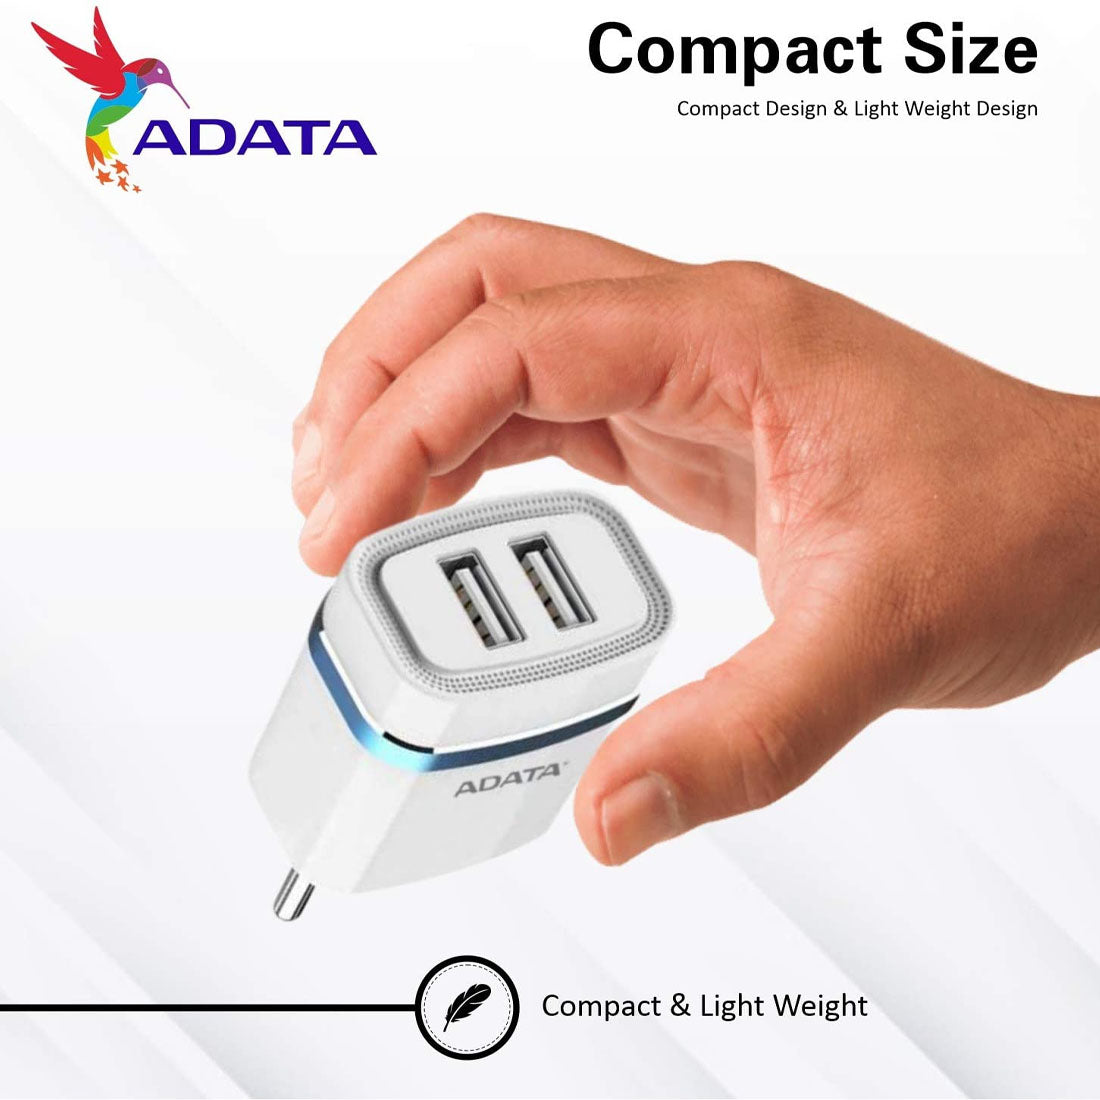 ADATA ADW-23 Dual USB Port Wall Charger with 2.4A Fast Charging and Intelligent Charging Technology